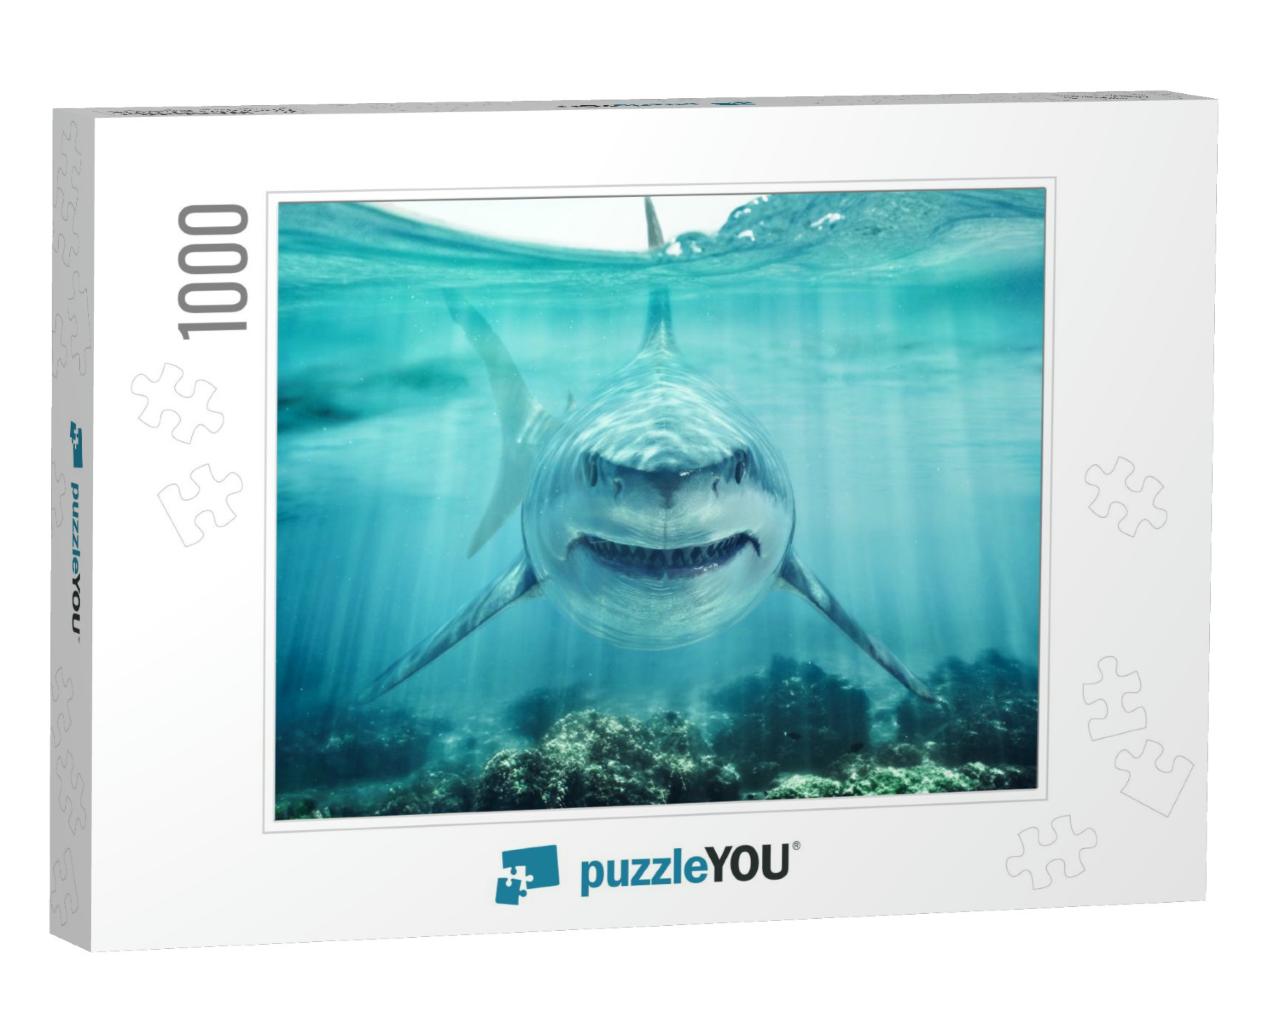 A Predator Great White Shark Swimming in the Ocean Coral... Jigsaw Puzzle with 1000 pieces